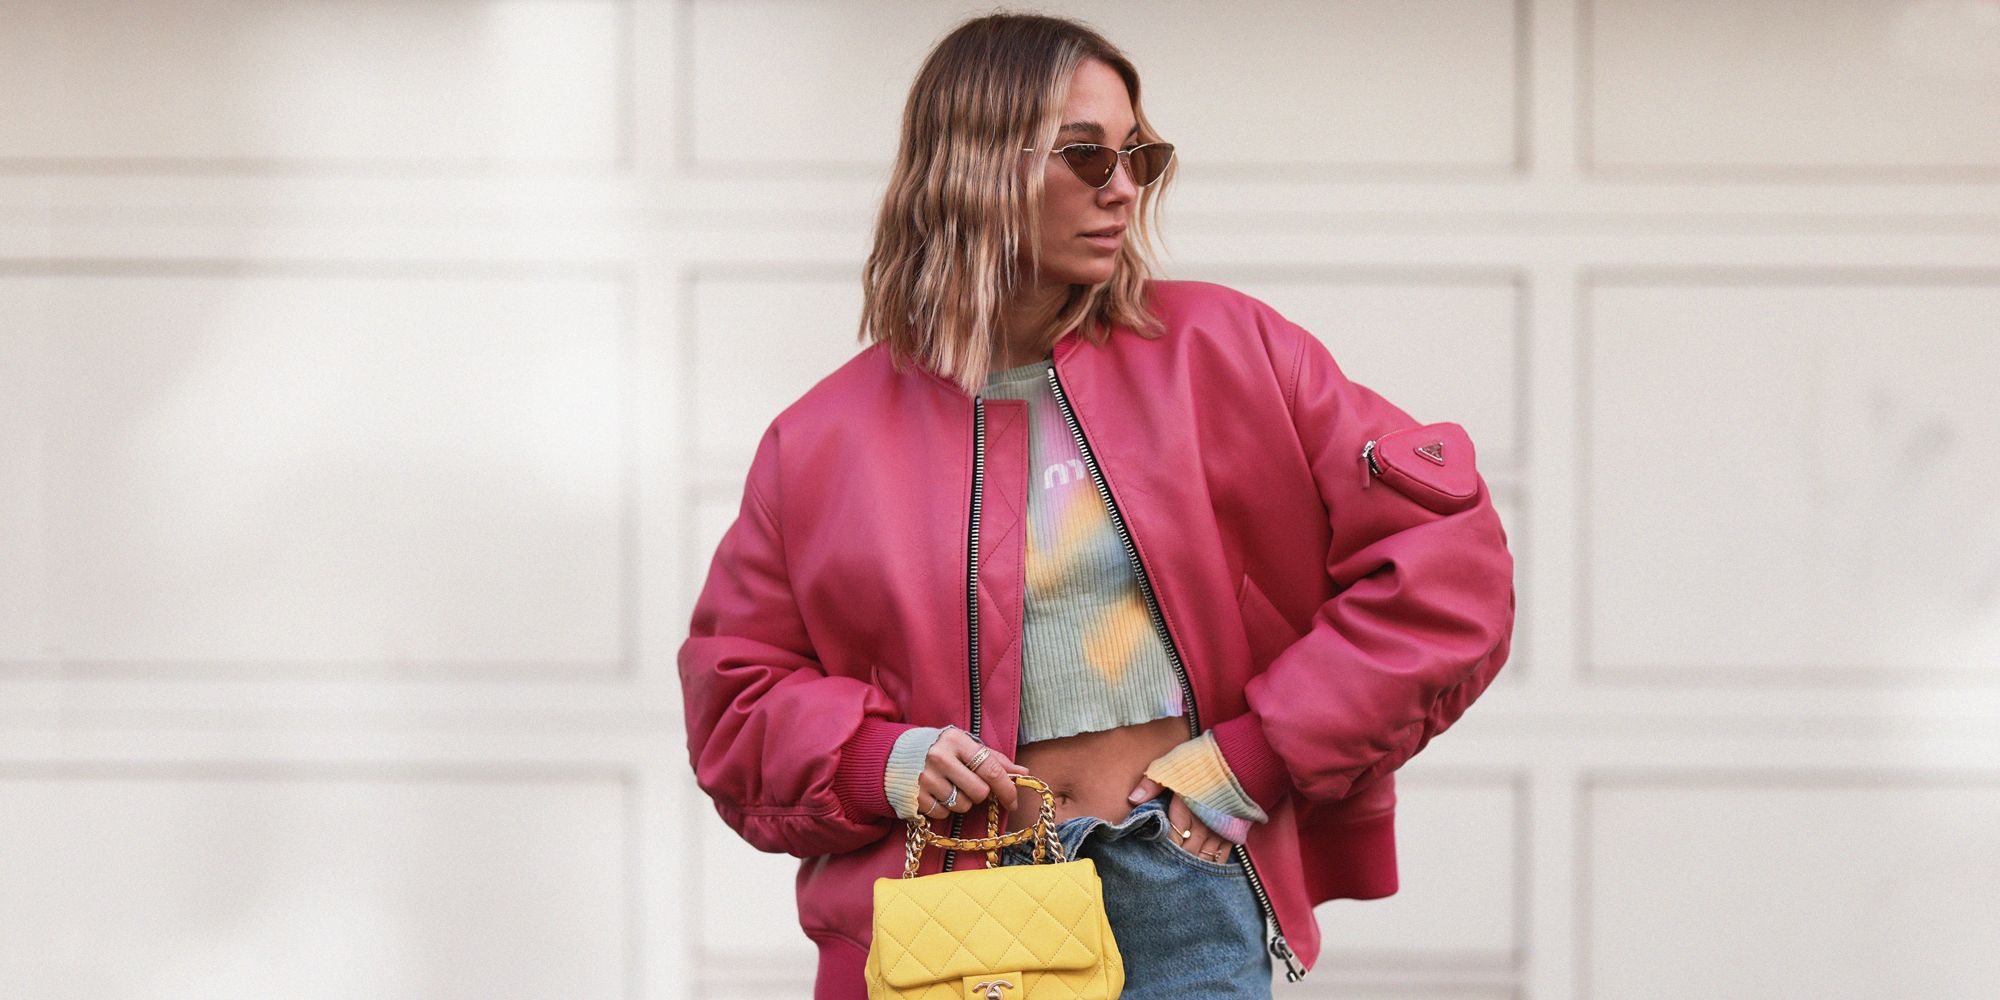 Peep Your New Forever Jacket: The Cropped Trench Coat - The Mom Edit